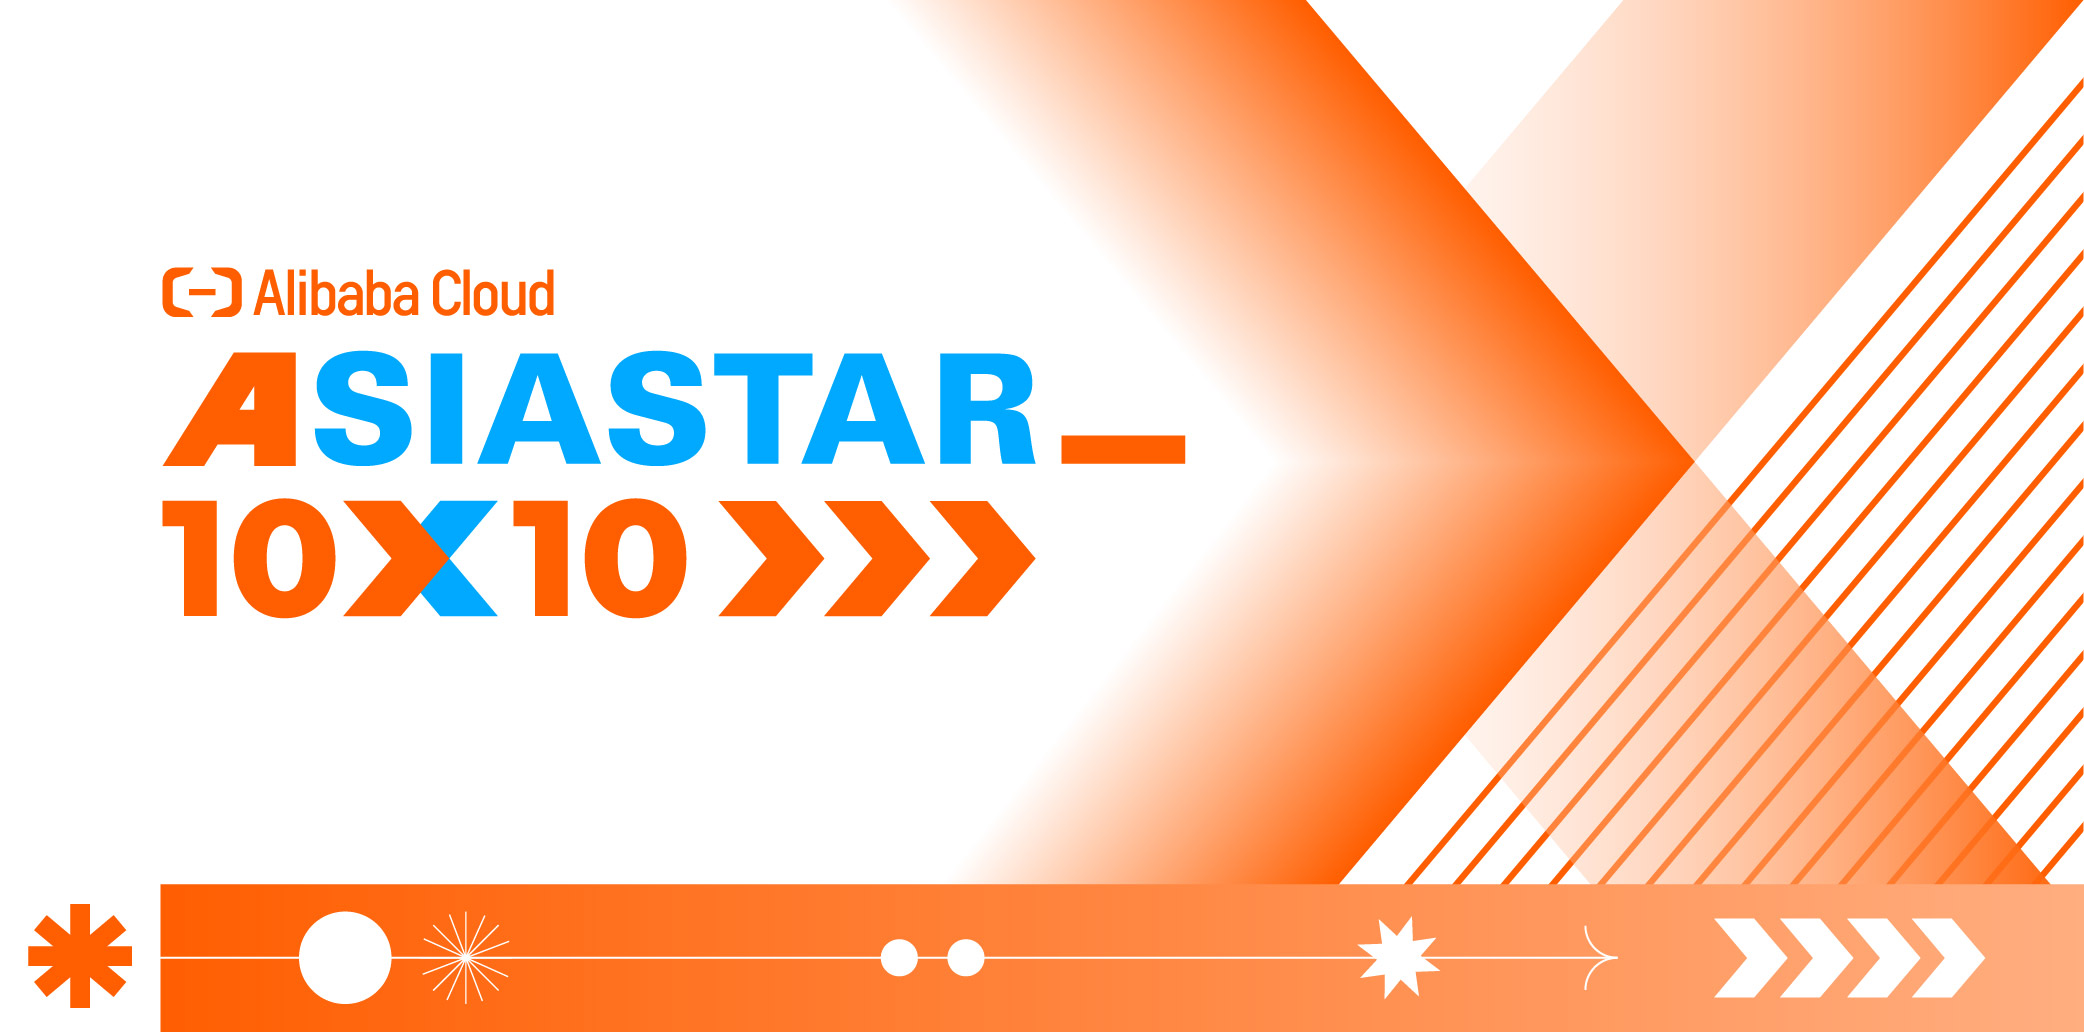 Alibaba Cloud launches AsiaStar 10×10 campaign to highlight Southeast Asian startups